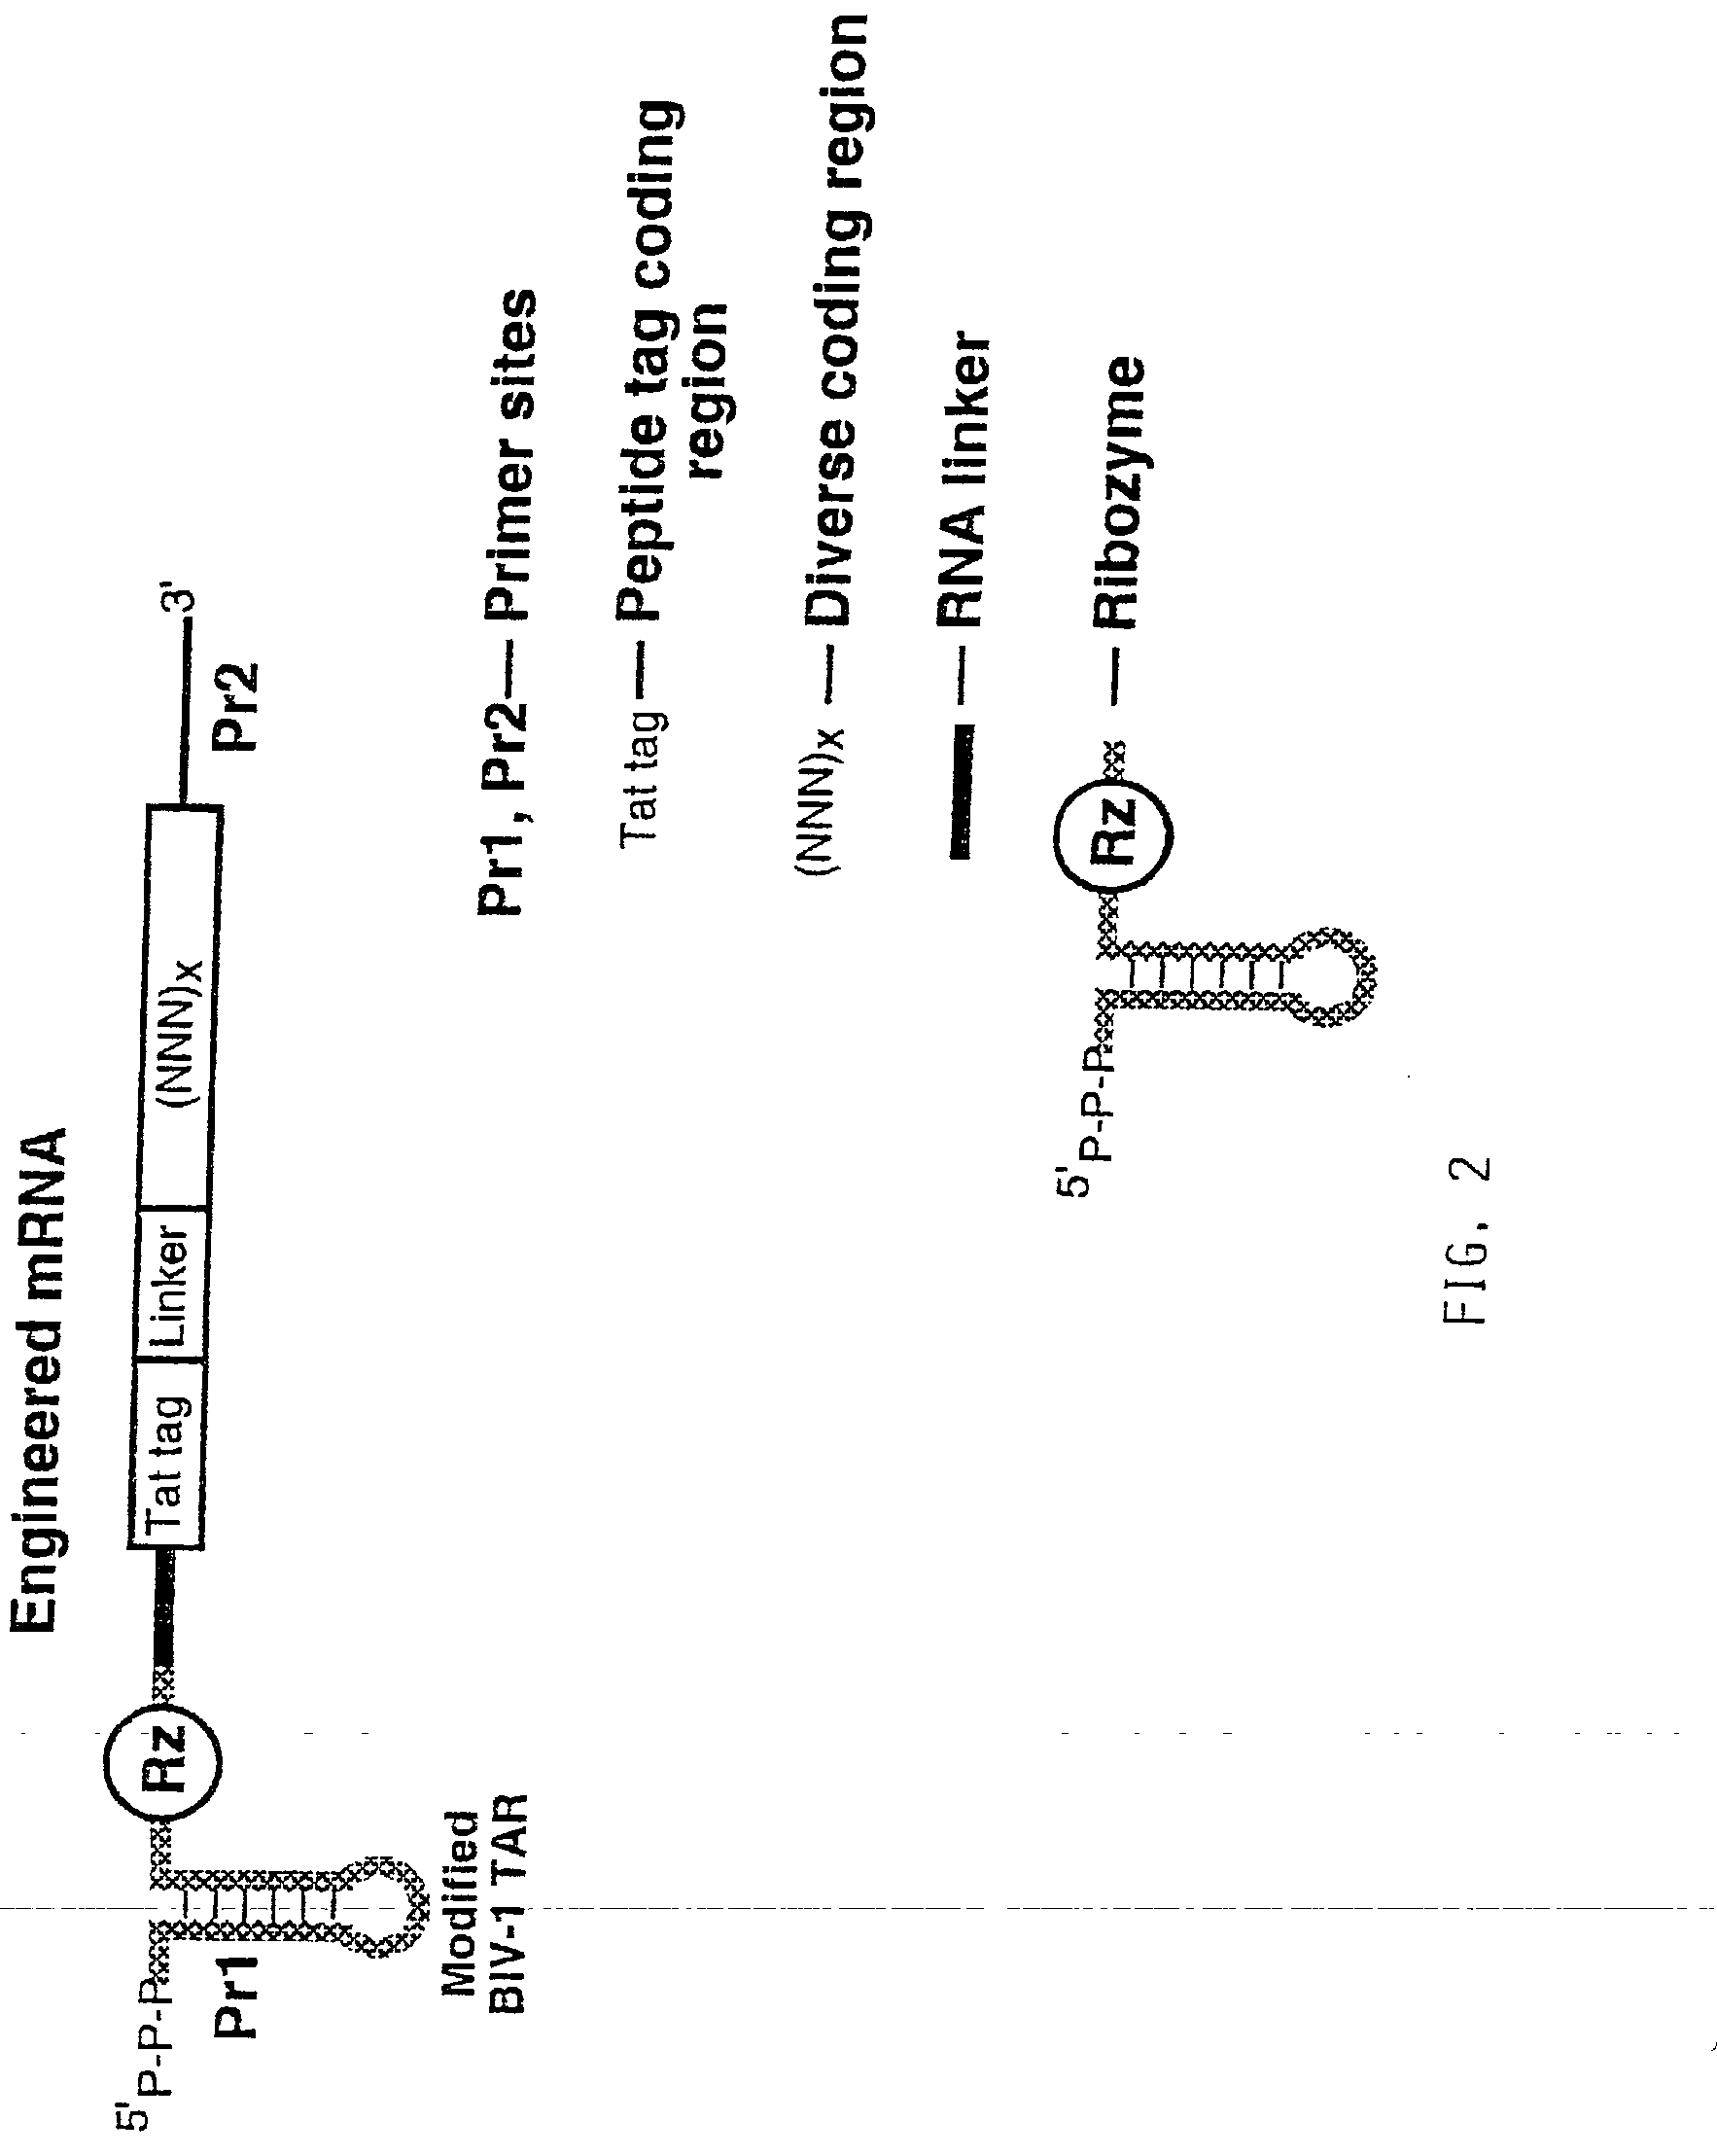 Use of a ribozyme to join nucleic acids and peptides